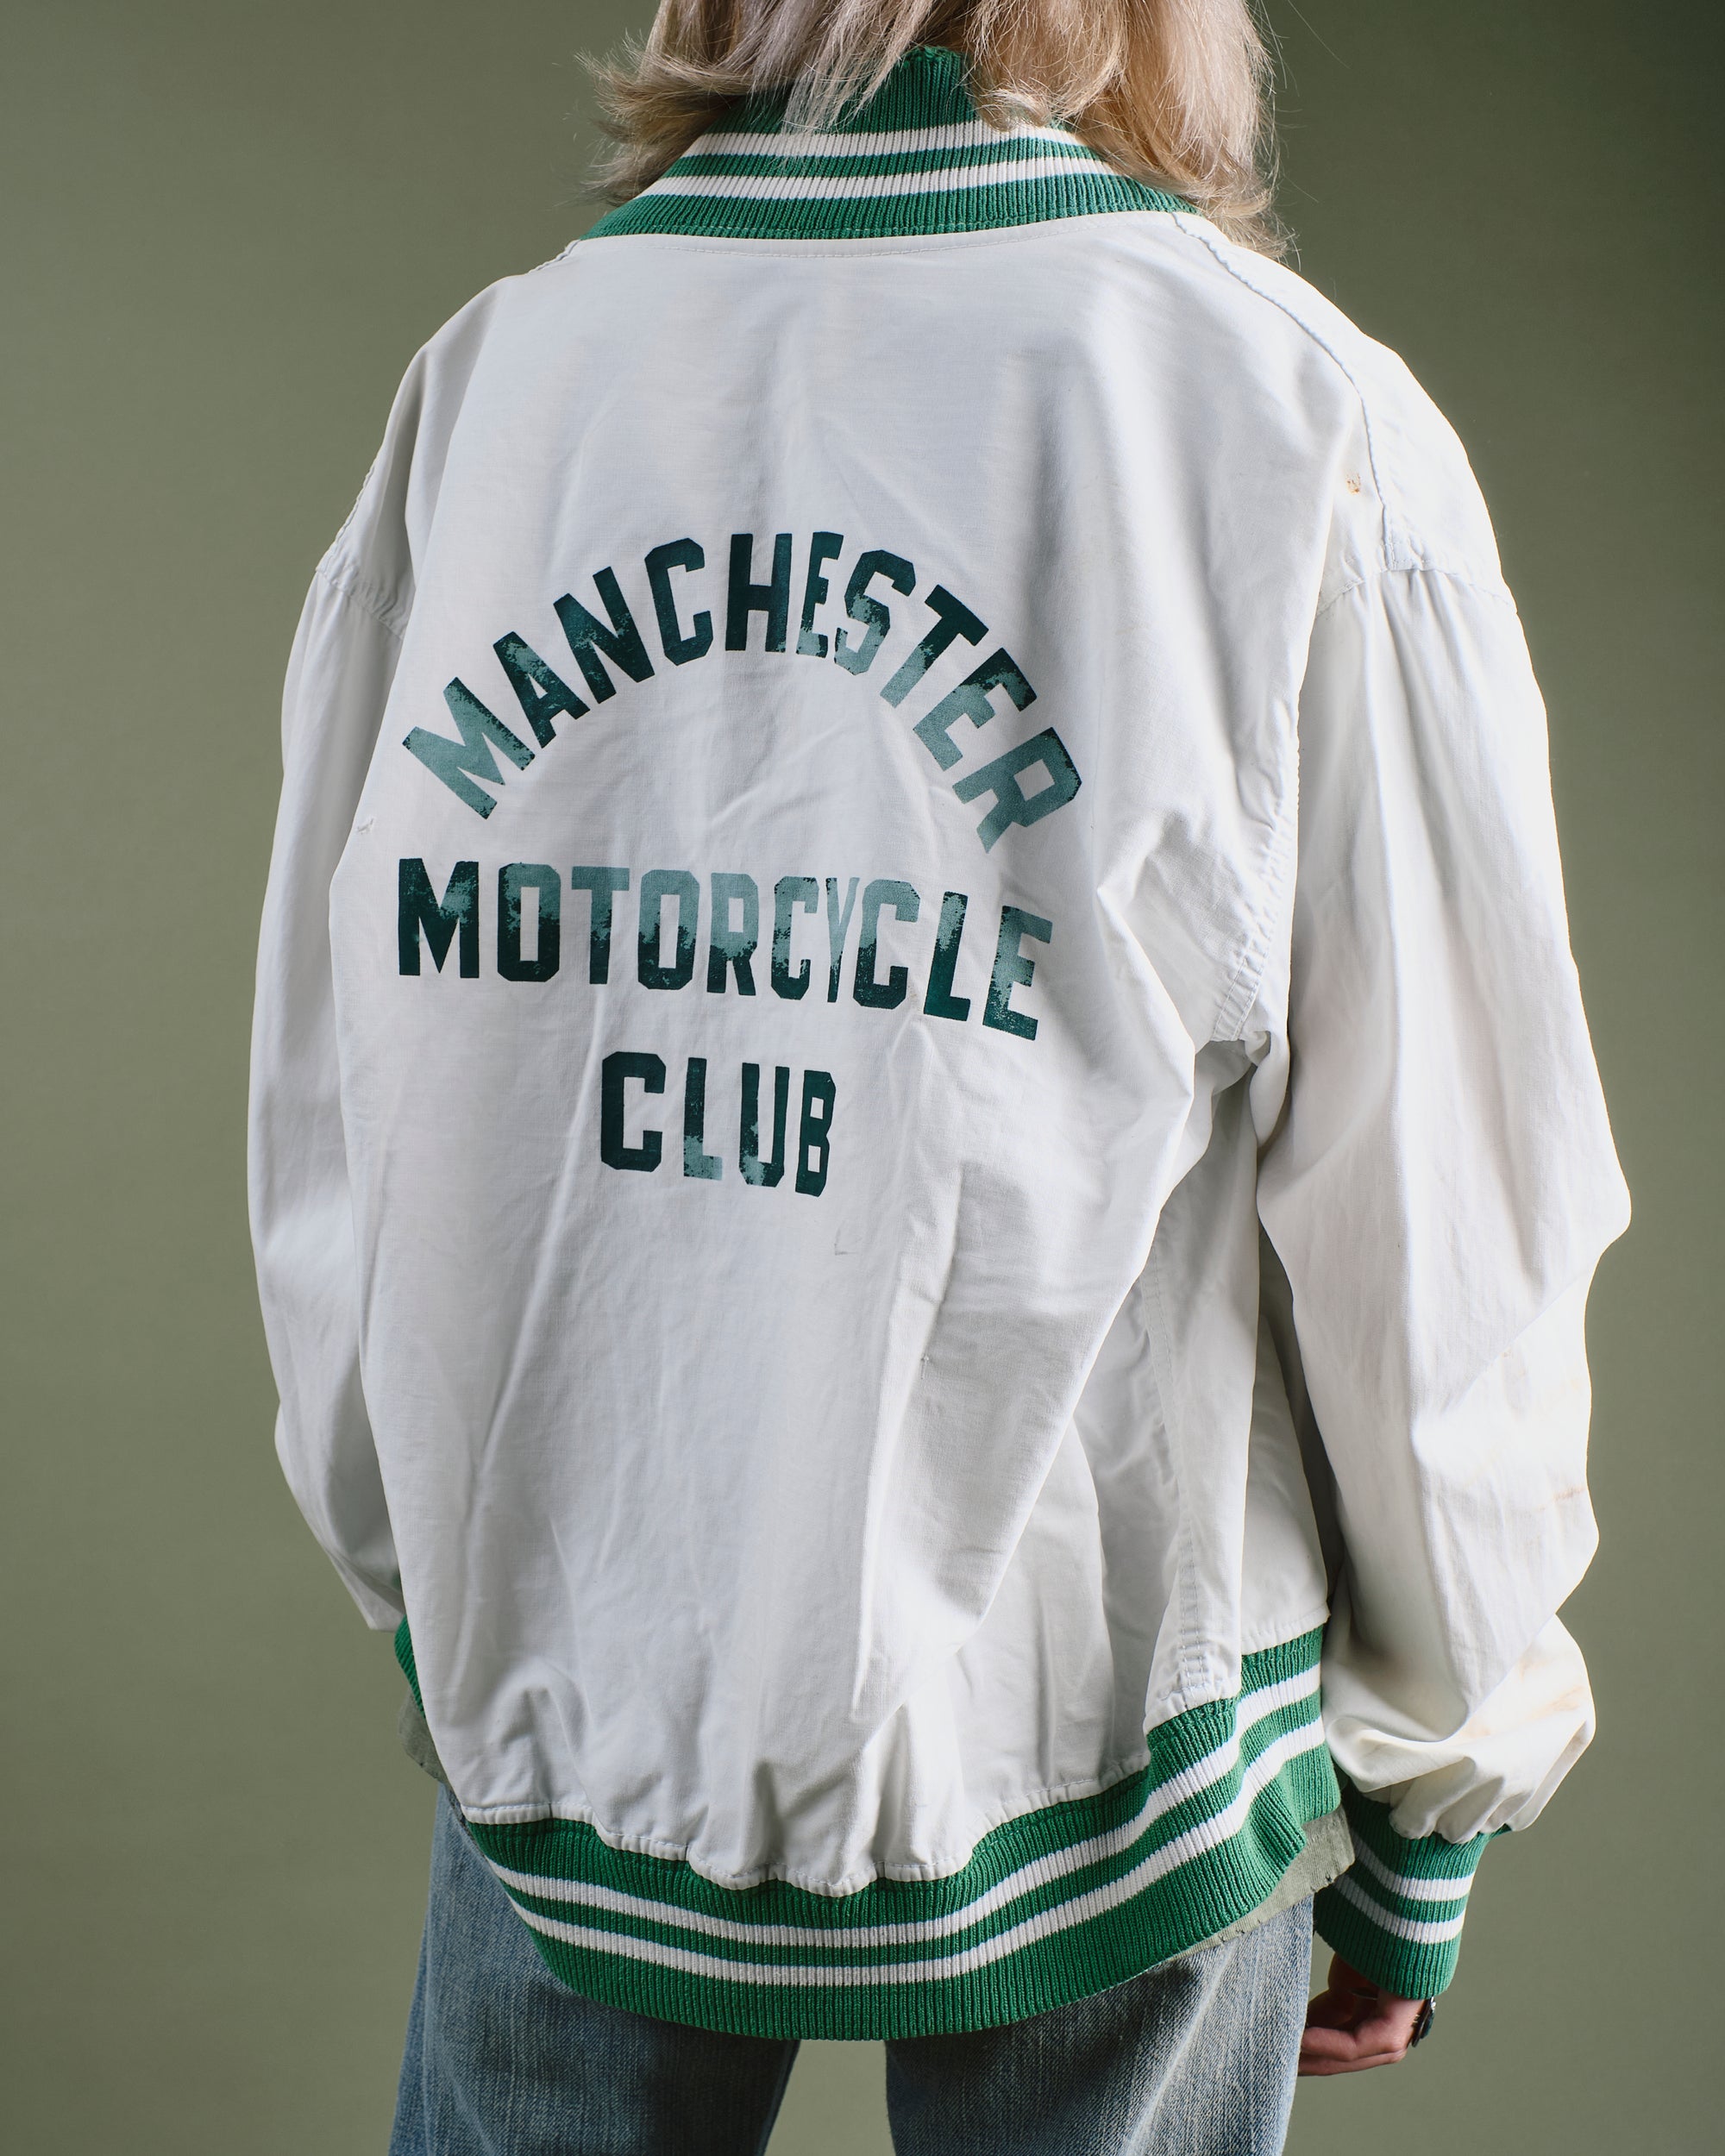 1950's "Manchester Motorcycle Club" Jacket